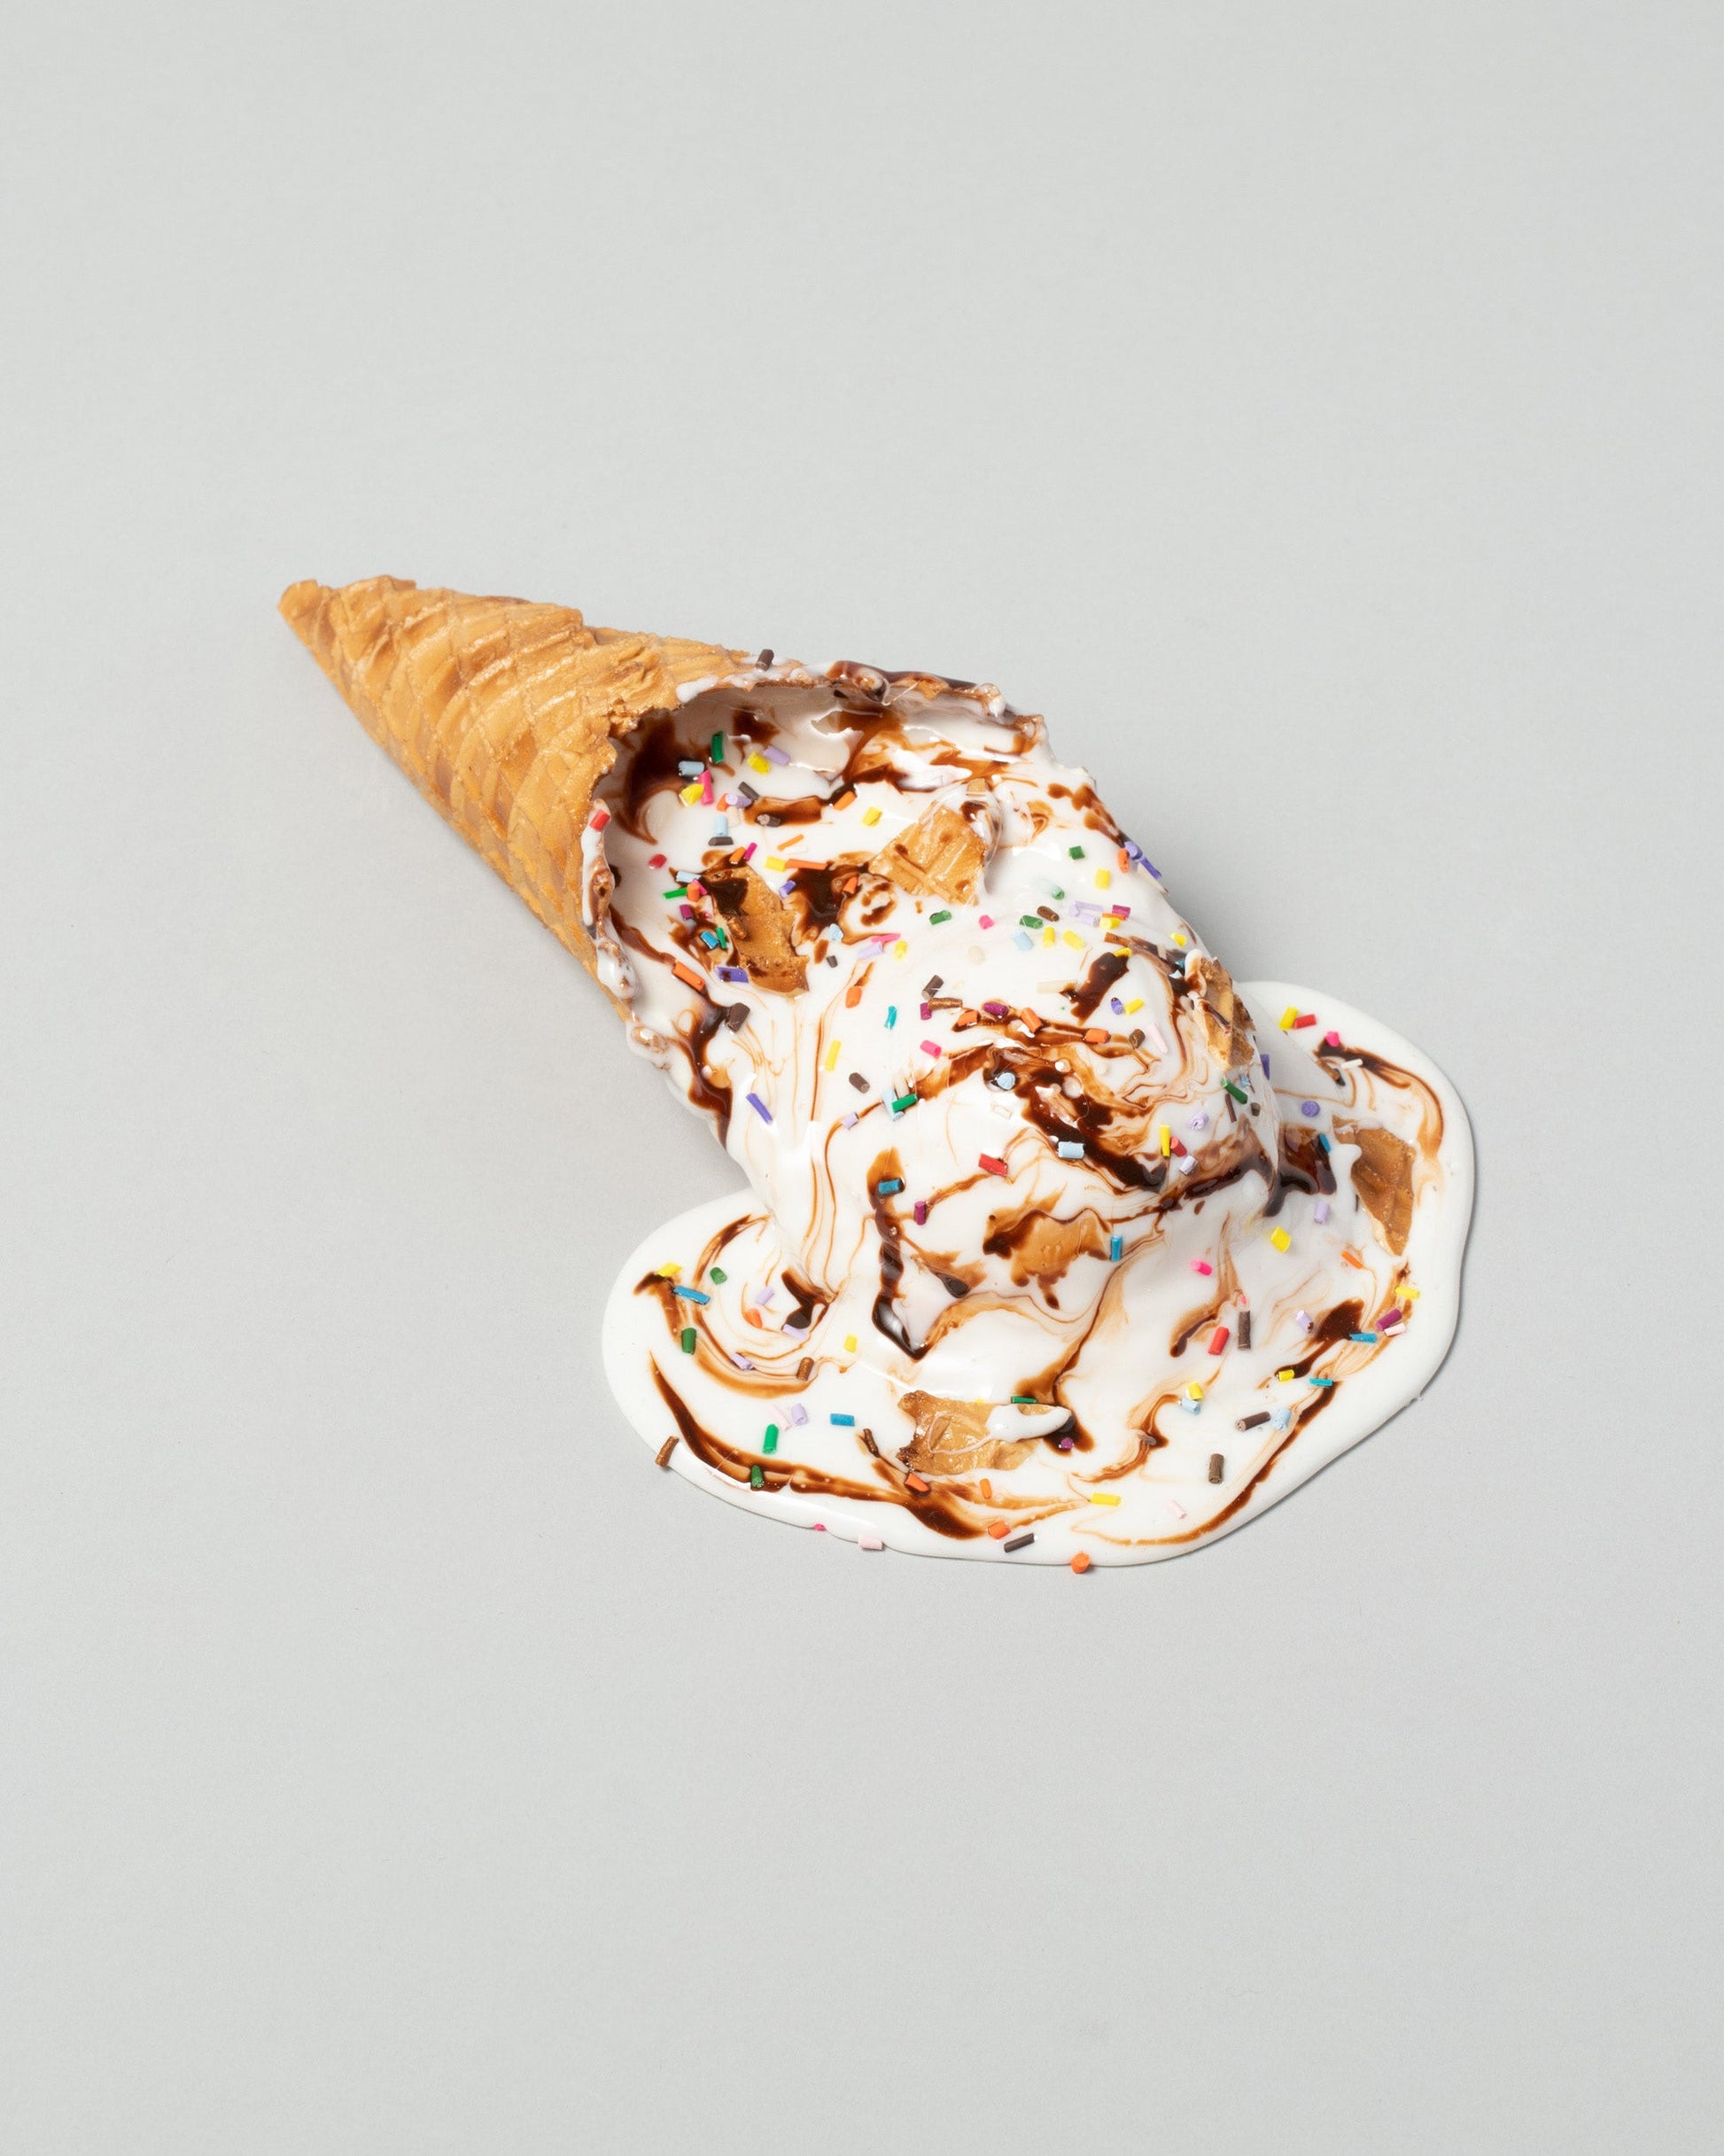 Spills Waffle Cone Ice Cream Spill on light color background.